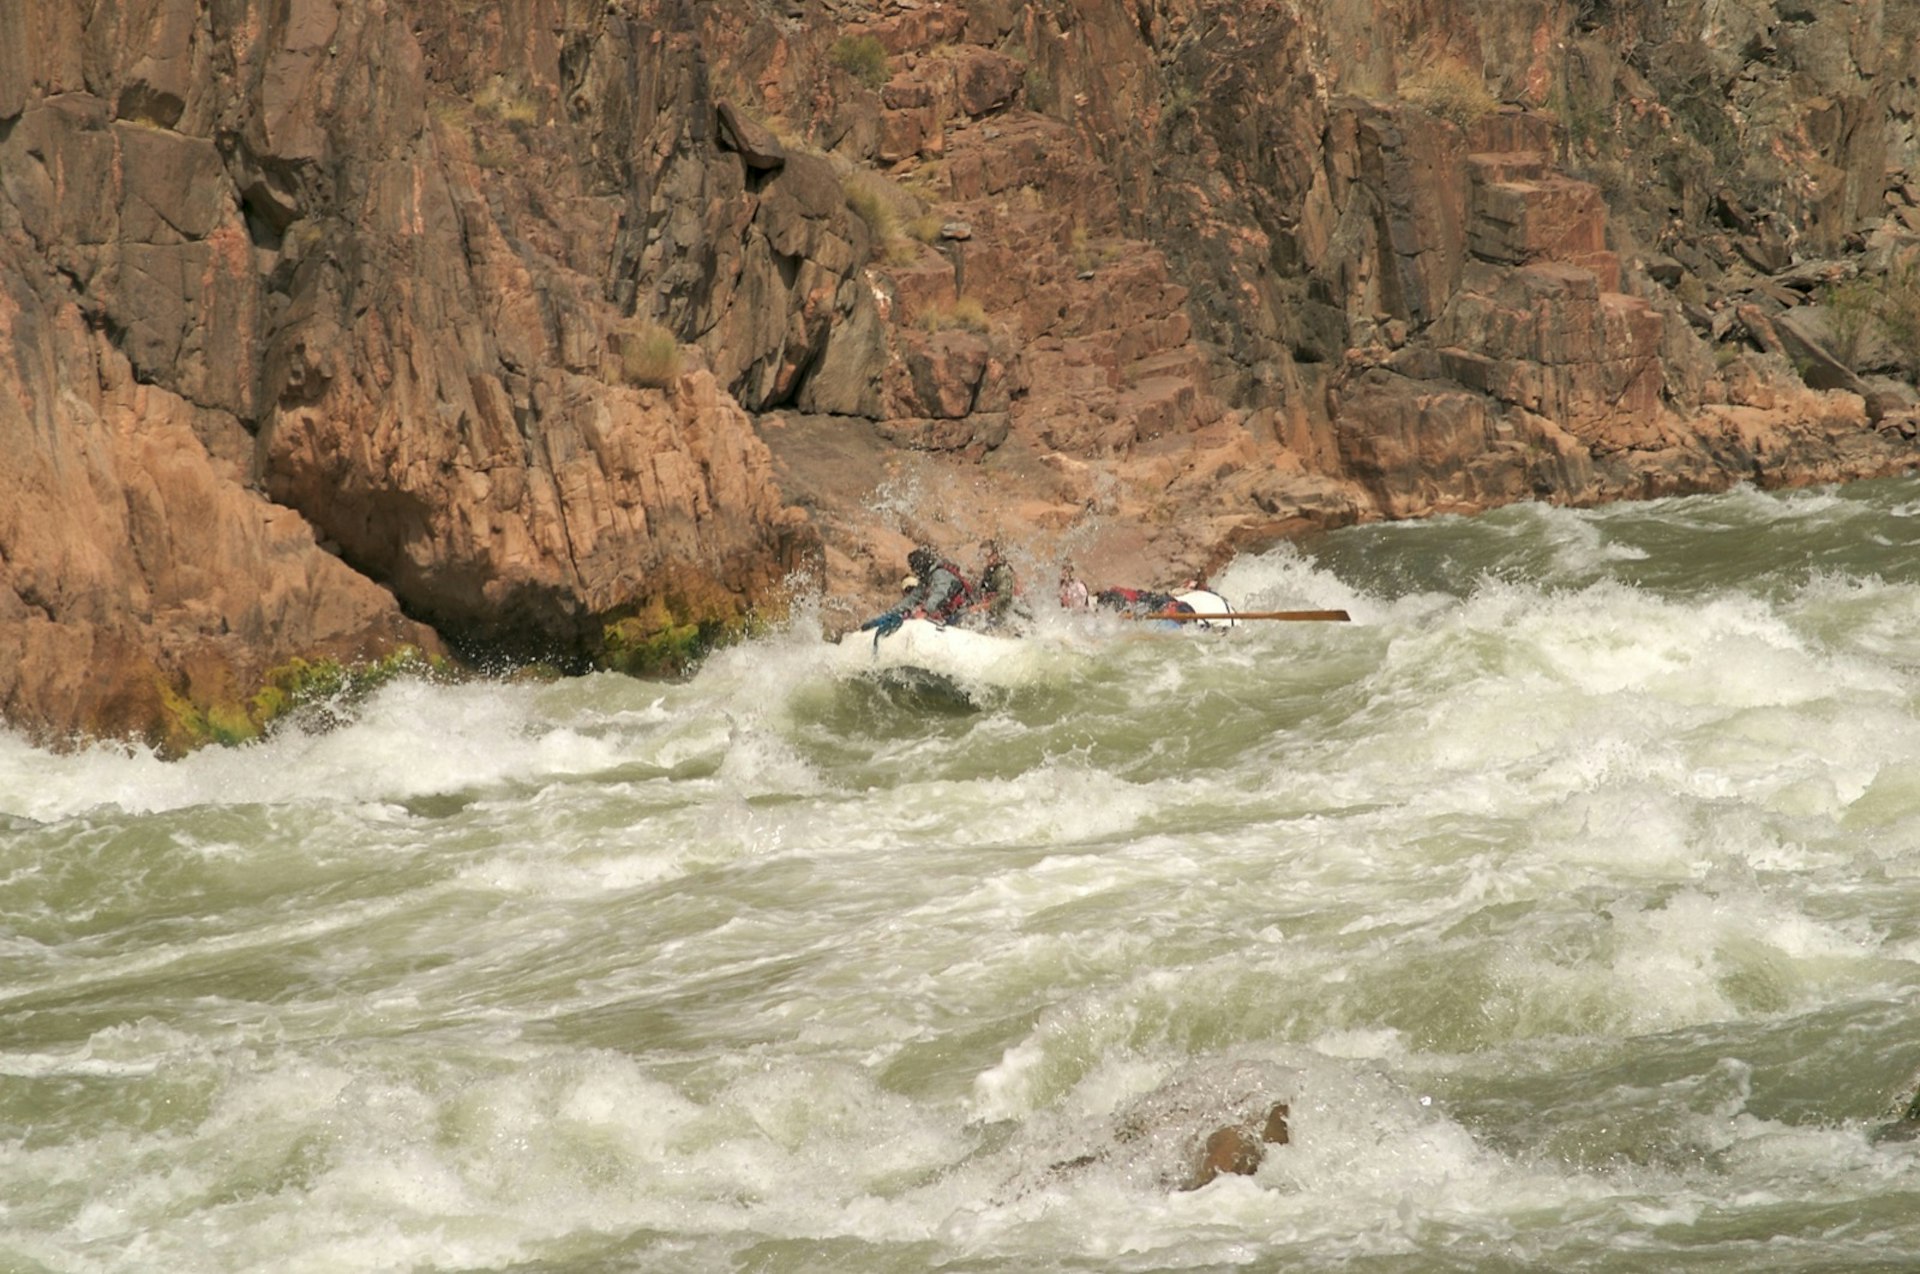 White water engulfs a raft as sheer rock walls rise in the background.